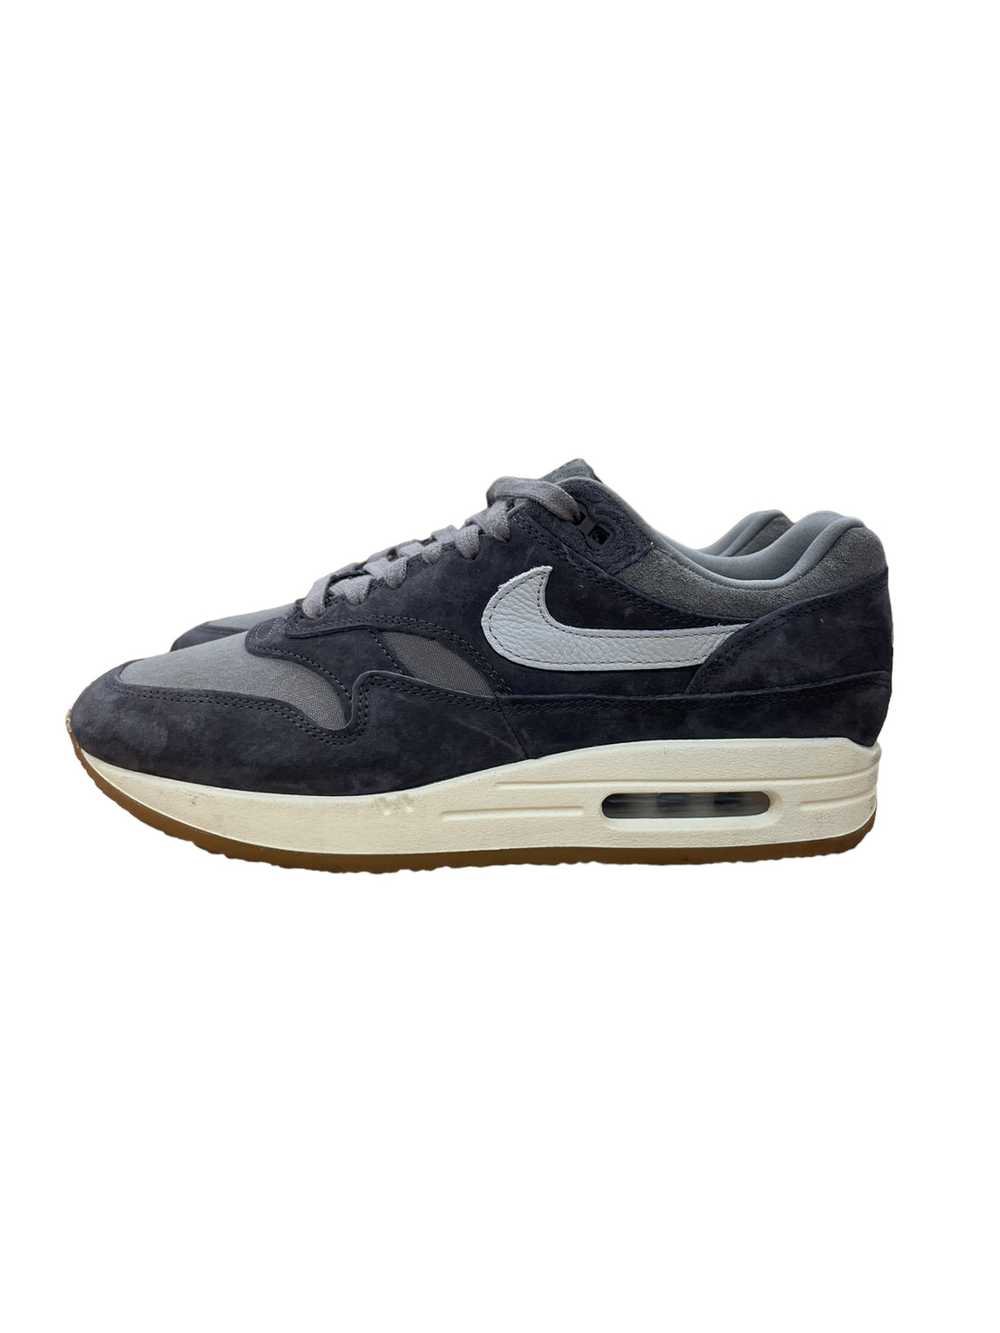 NIKE/Low-Sneakers/US 9/Suede/GRY/AIR MAX 1 - image 4